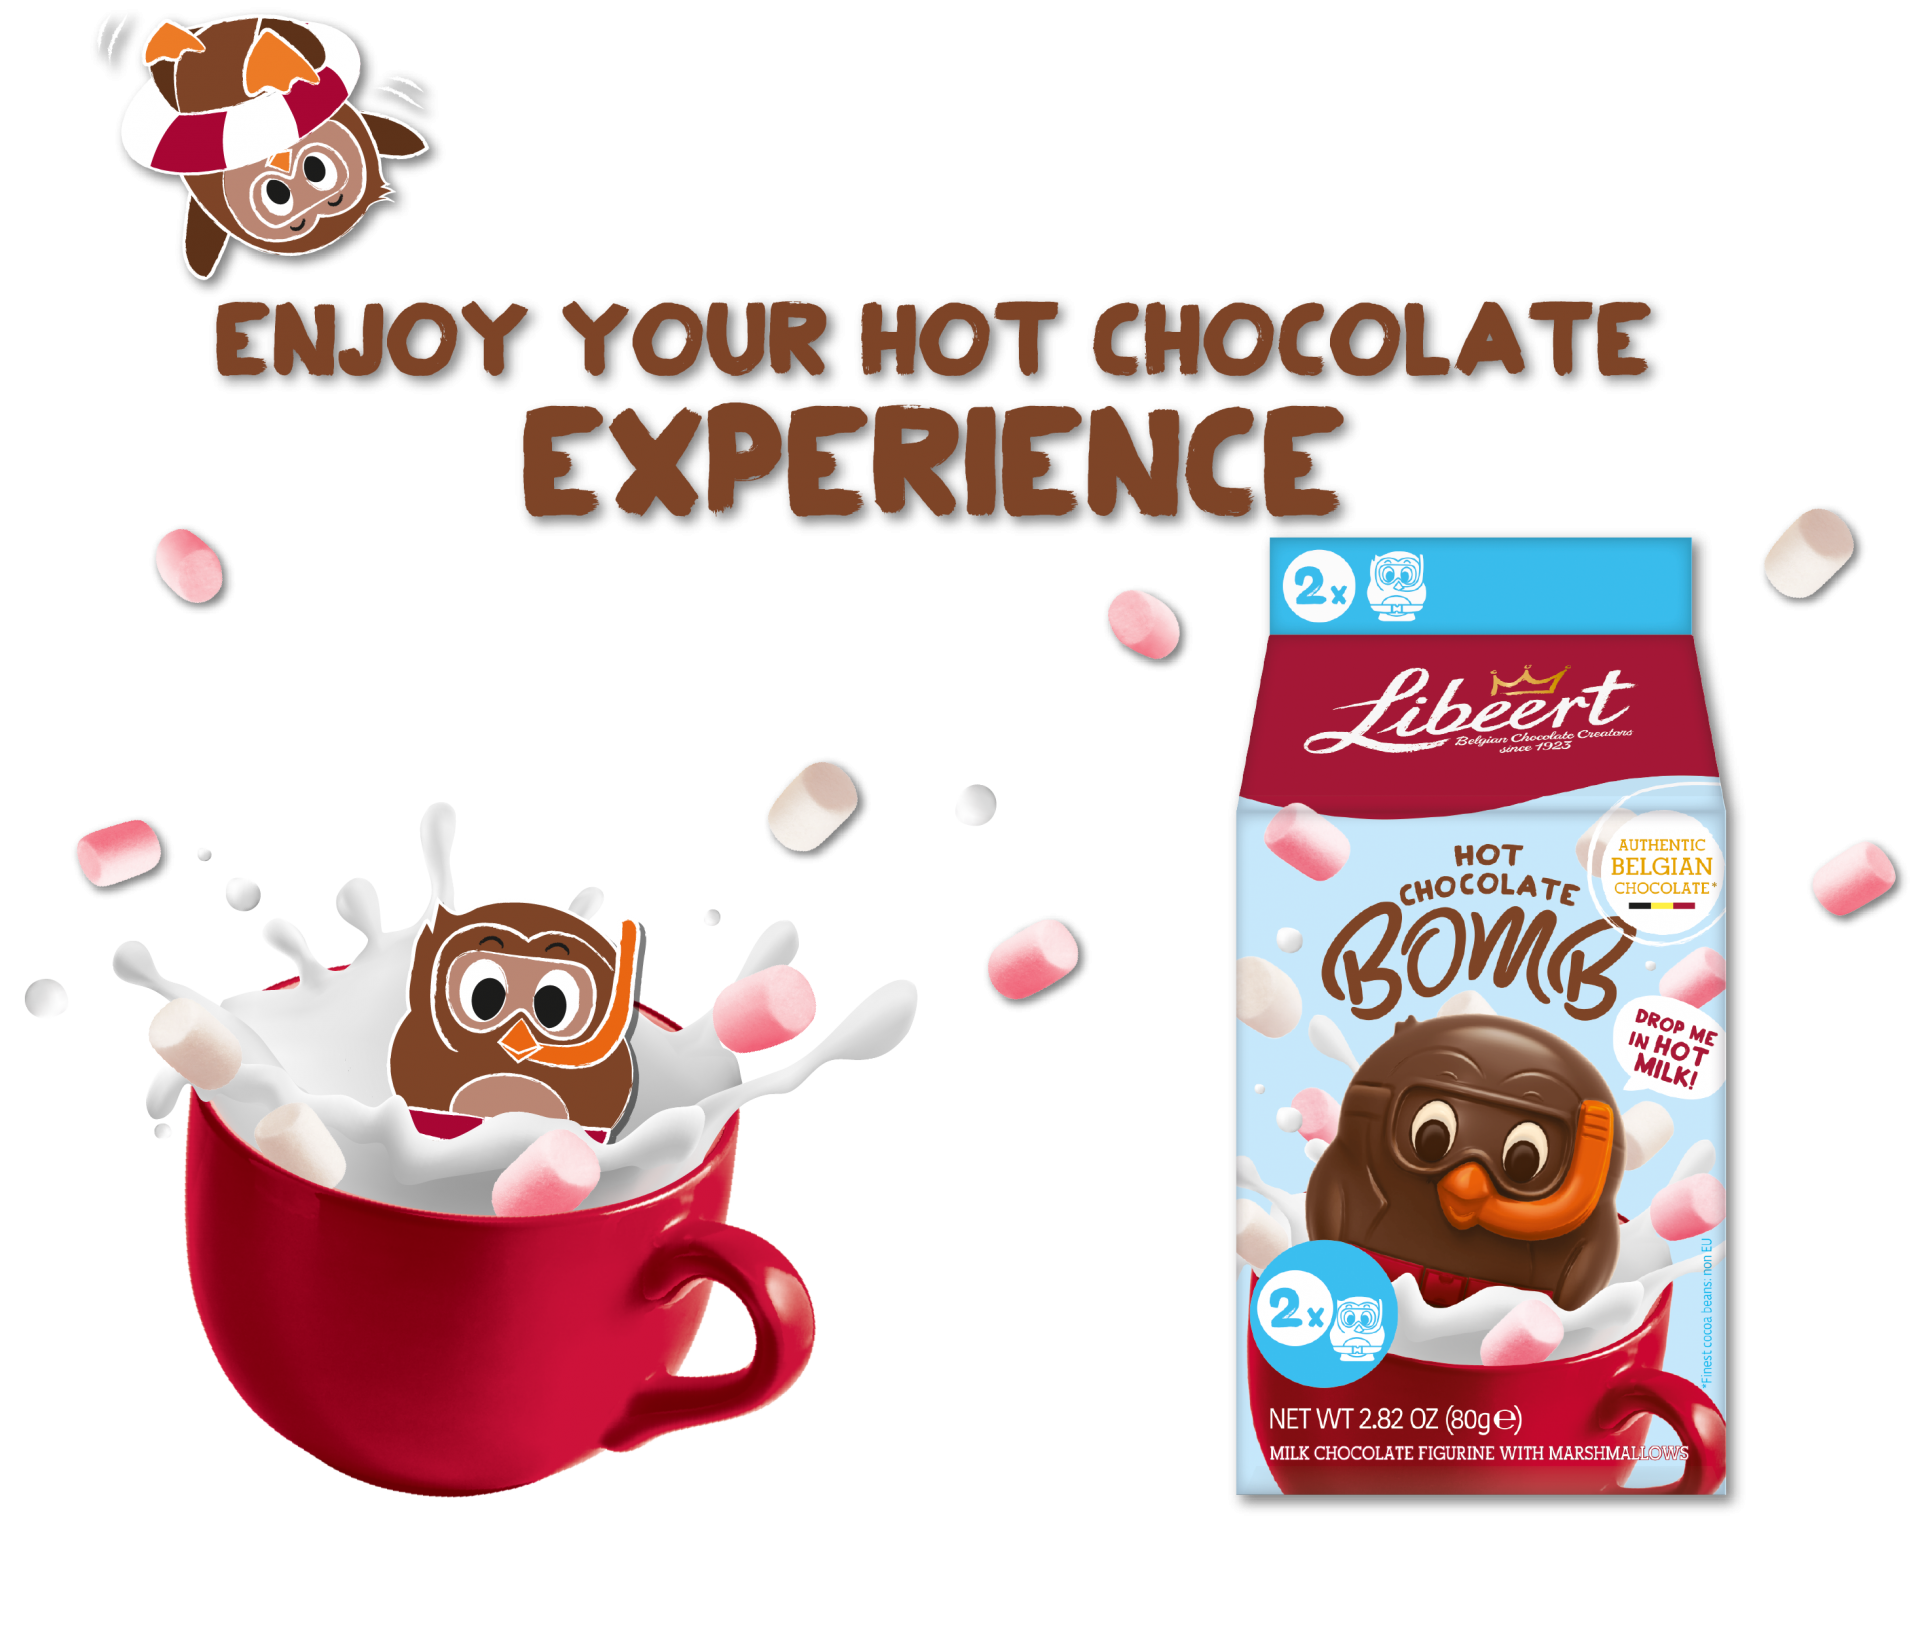 Enjoy your hot chocolate experience